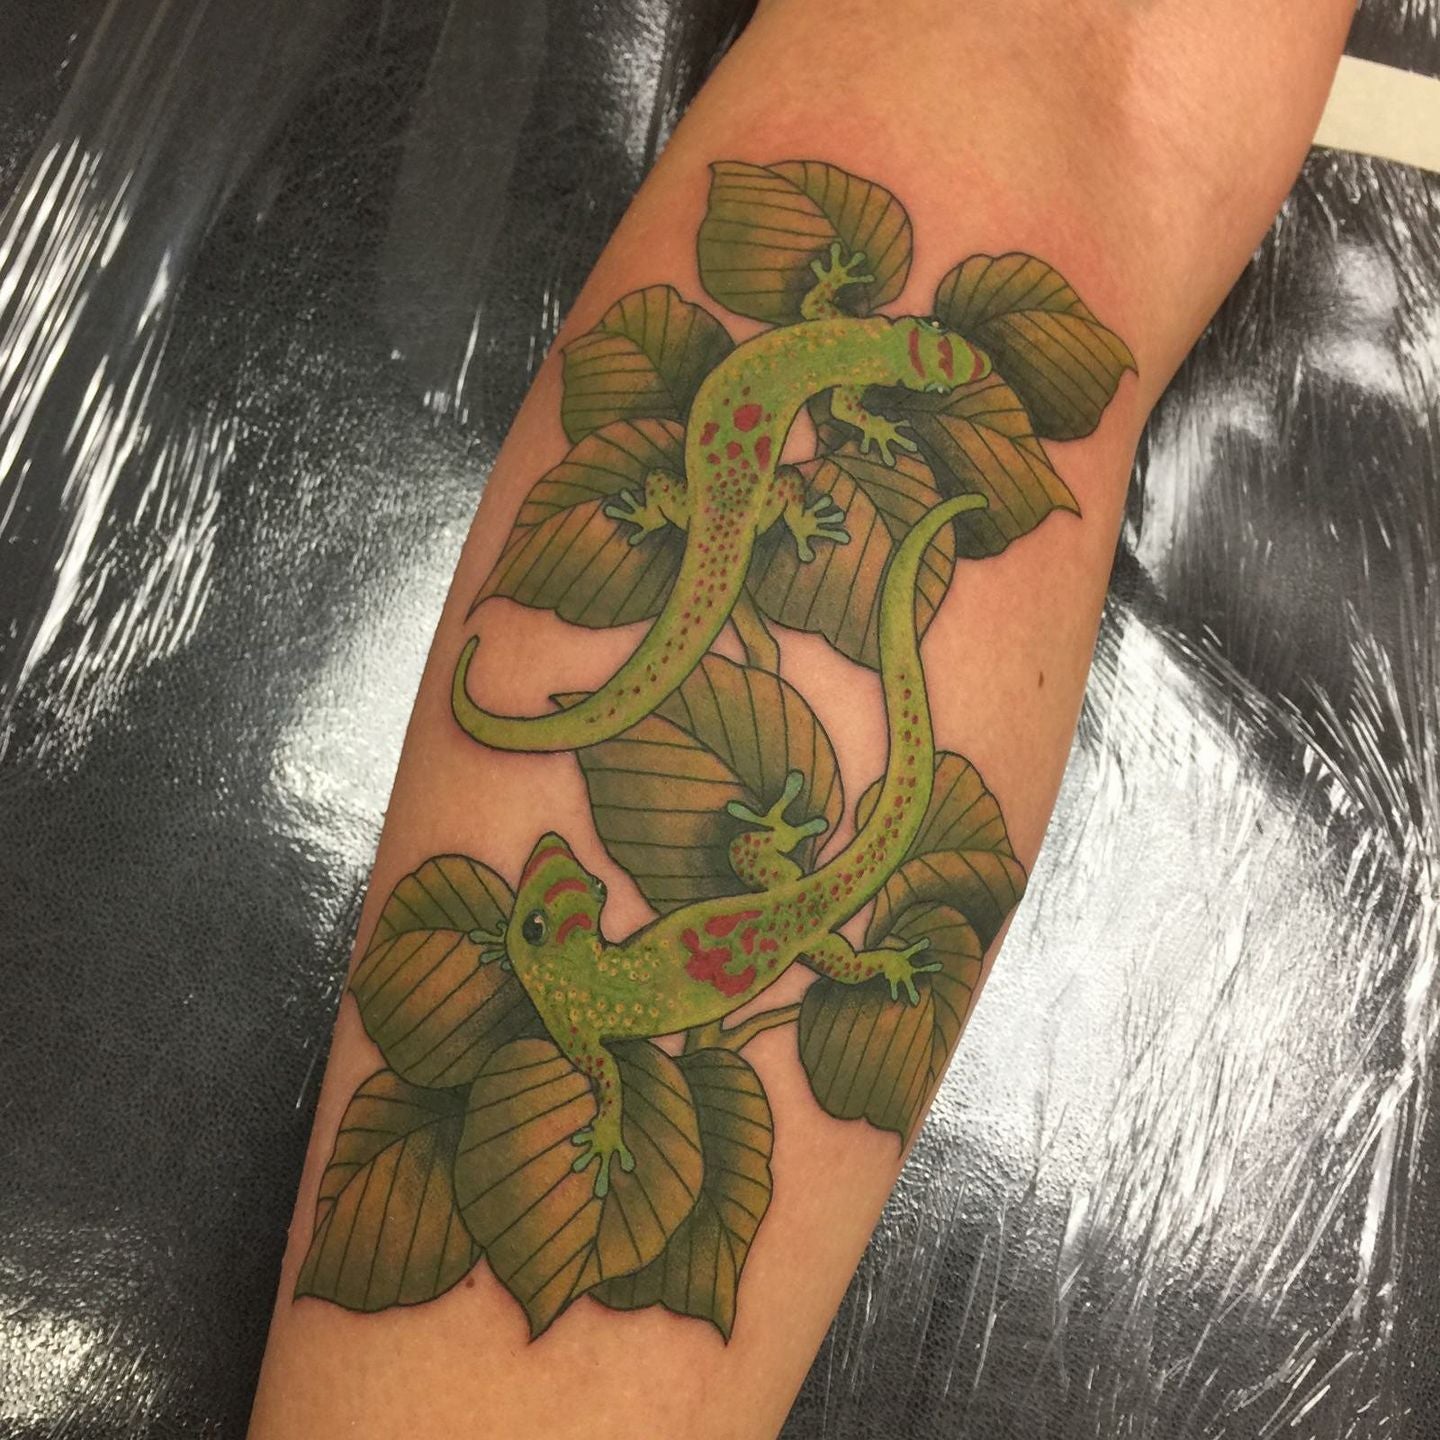 Tattoo of two green geckos with red patterns on their backs 